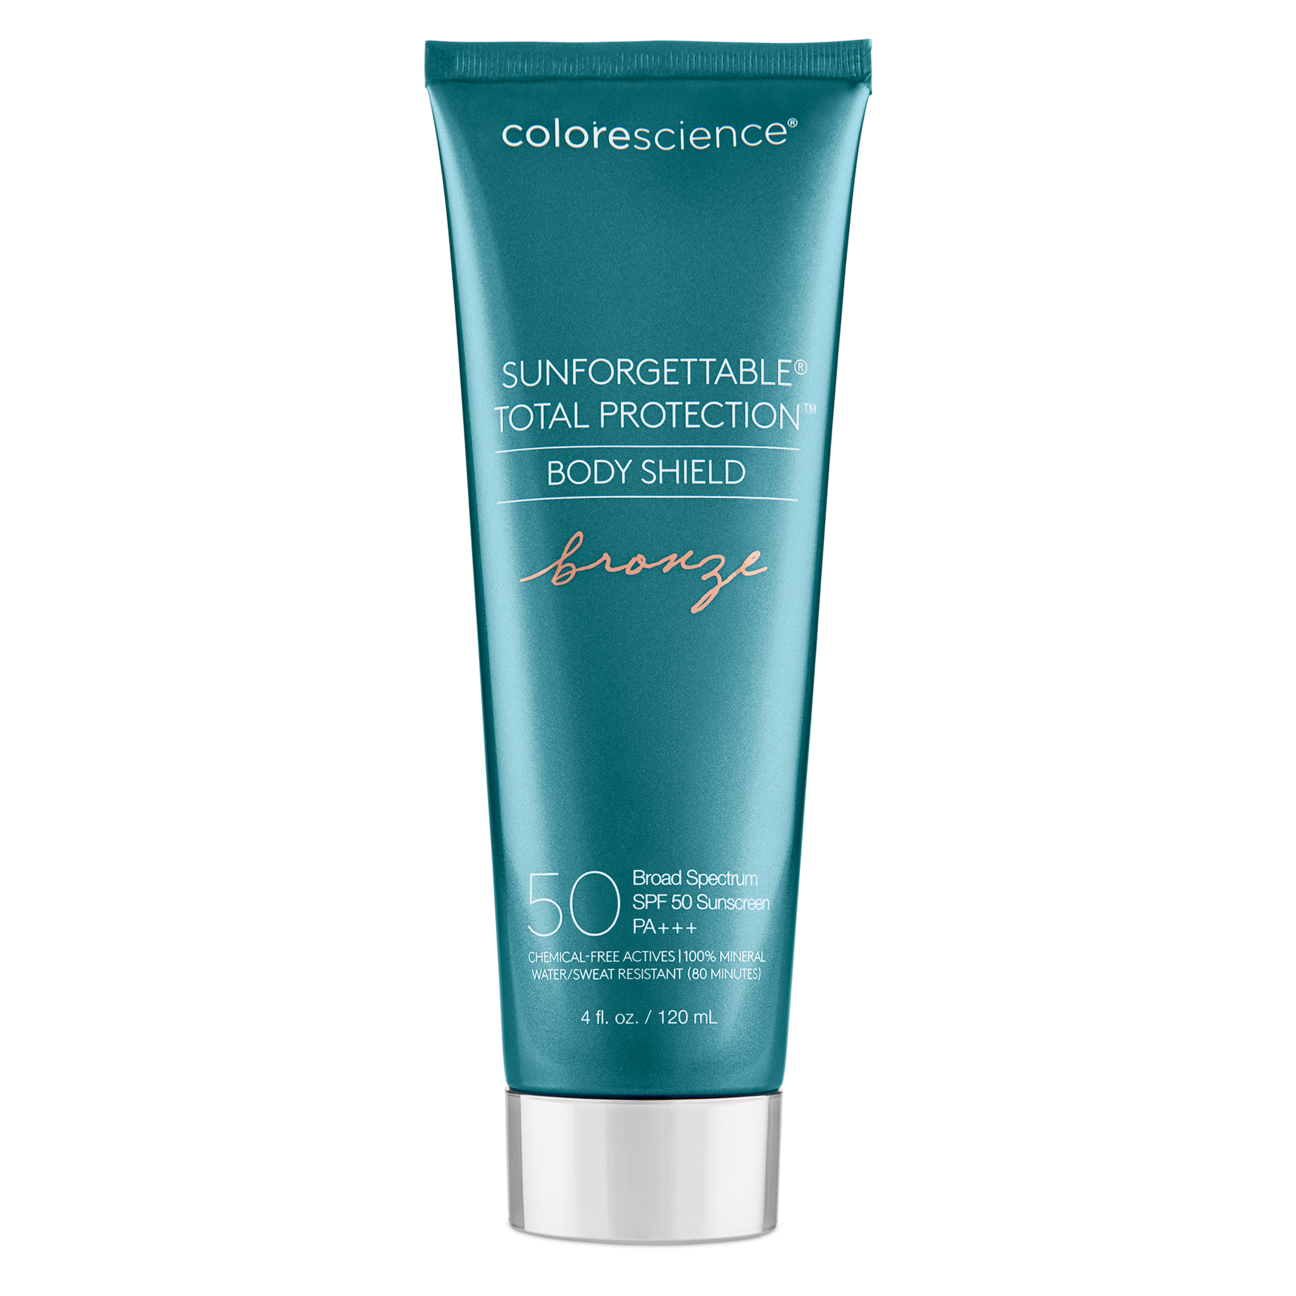 Colorescience, Sunforgettable Total Protection Body Shield Bronze